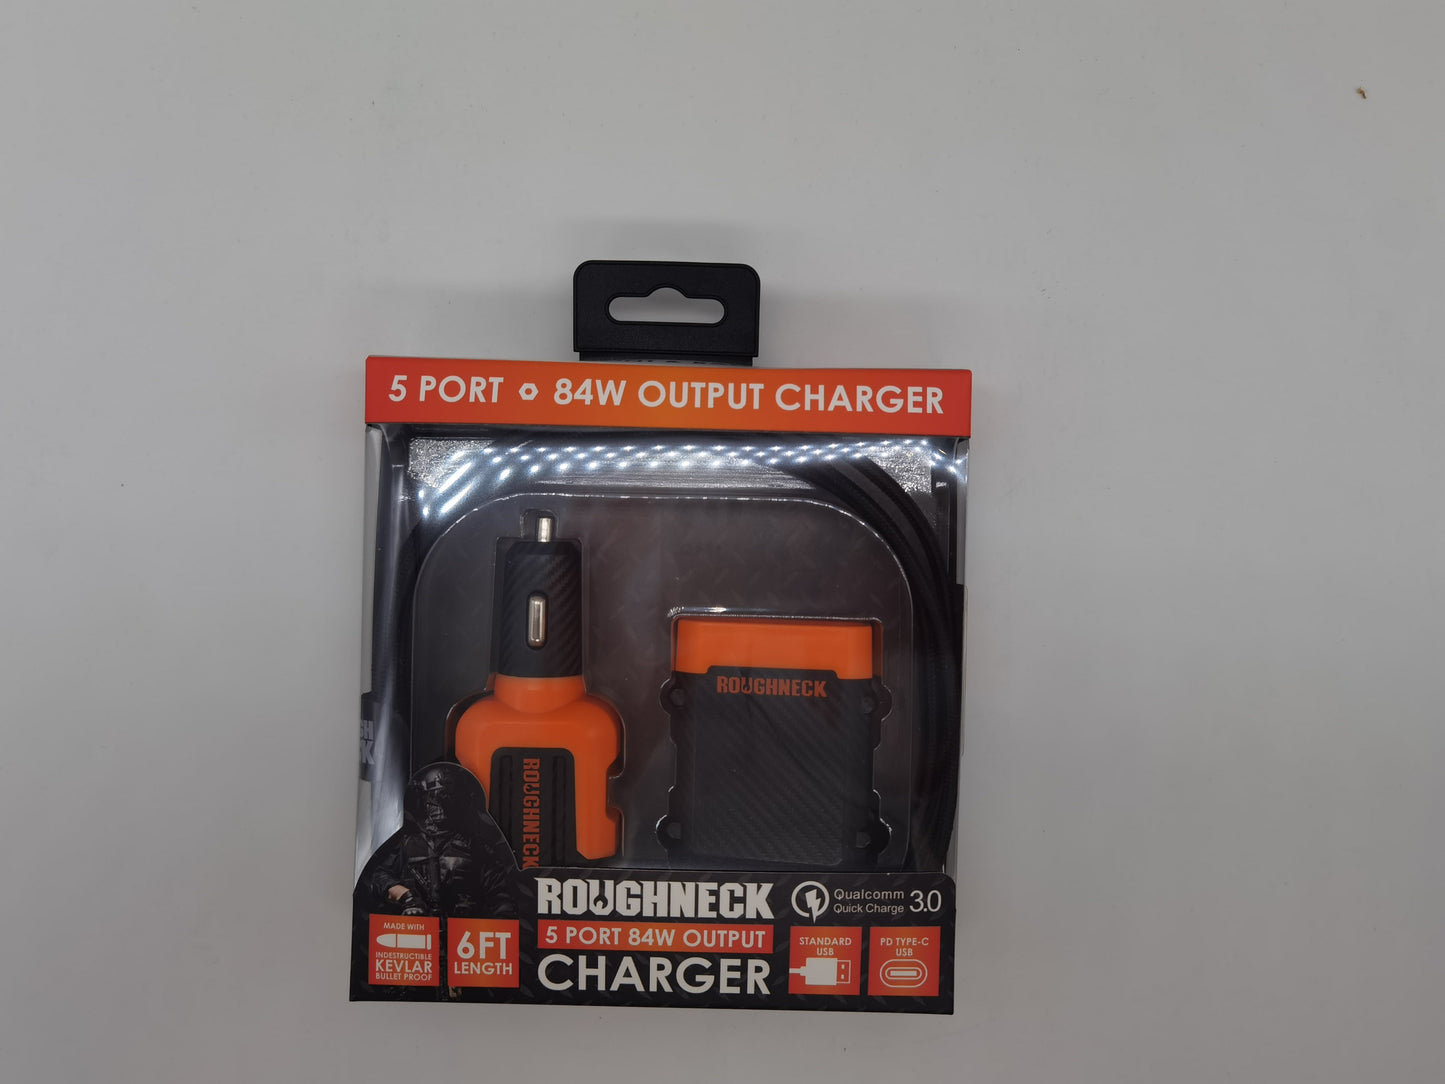 ITEM NUMBER 022914 ROUGHNECK CHARGER 4 PIECES PER DISPLAY